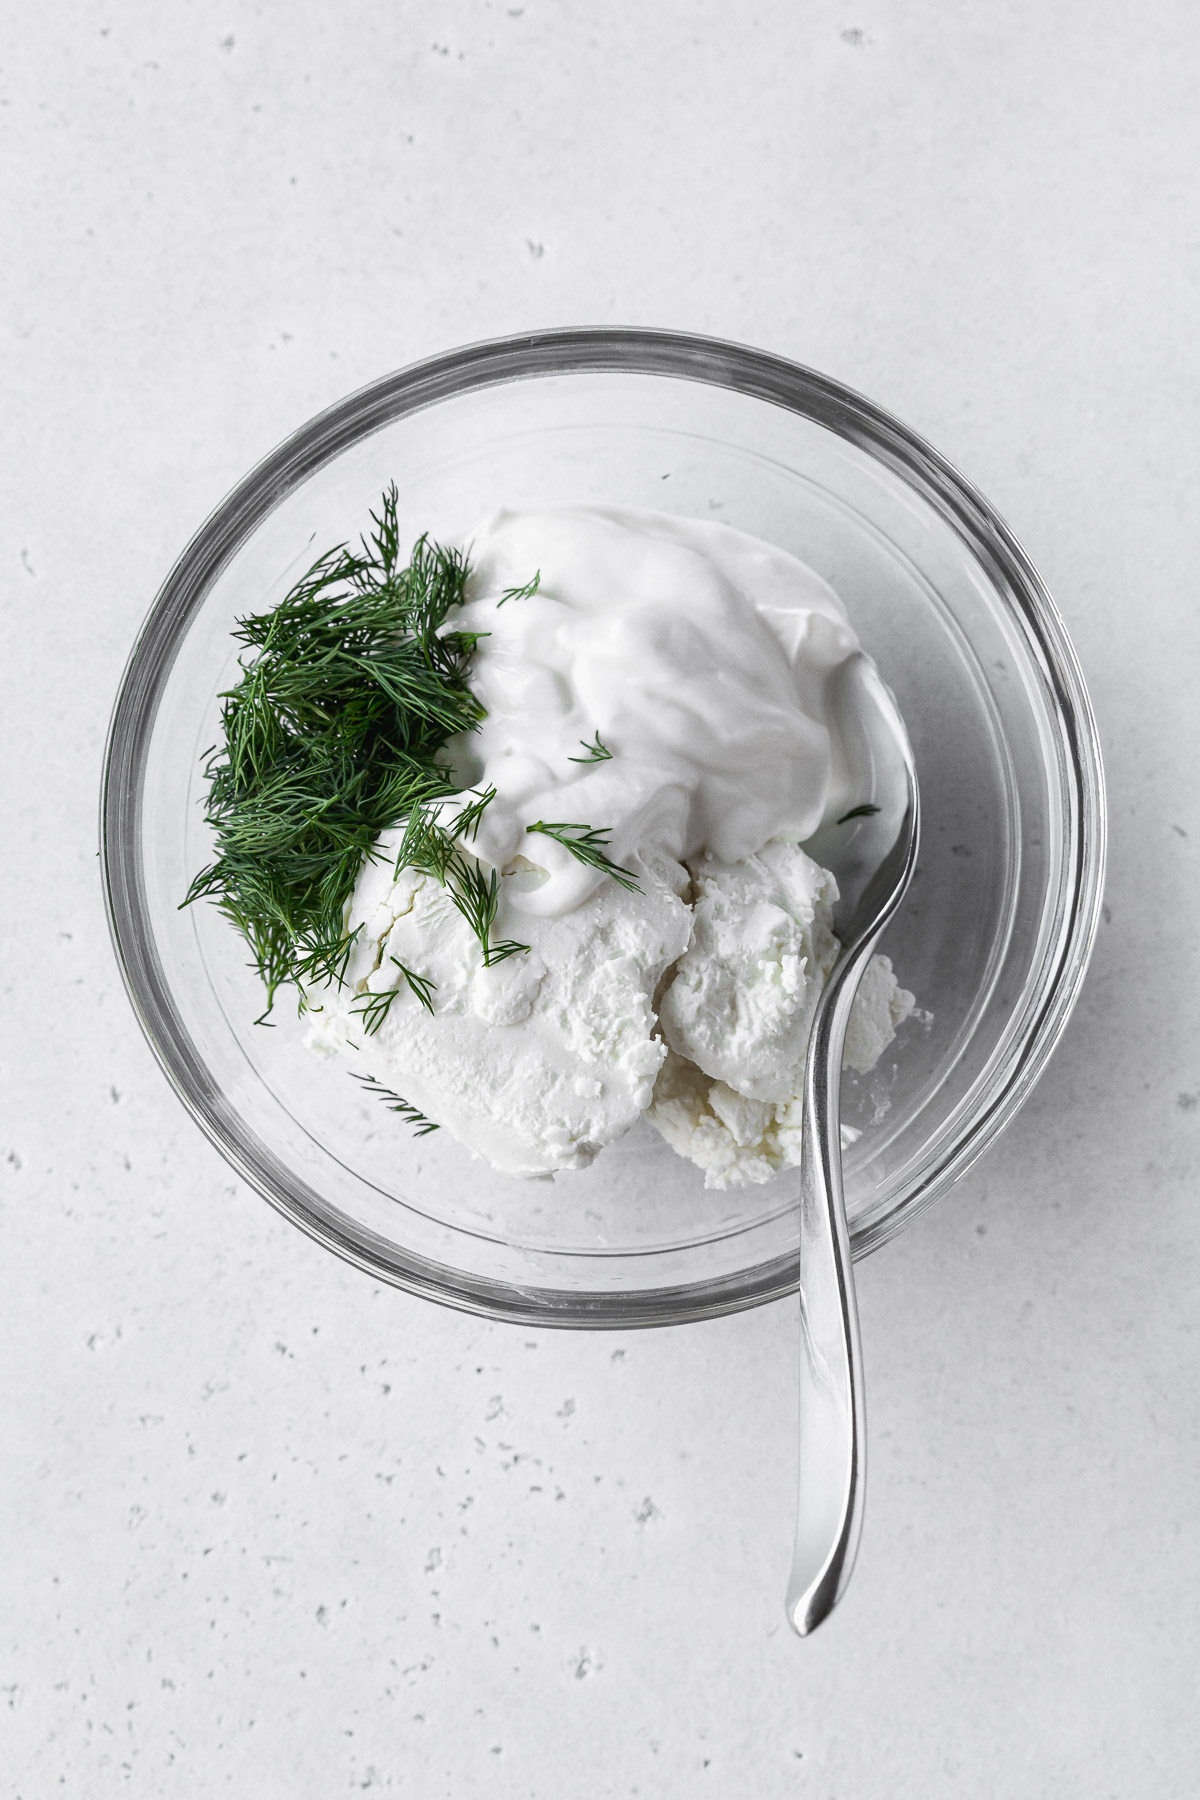 goat cheese, greek yogurt, and dill in a bowl to make spreadable goat cheese mix.